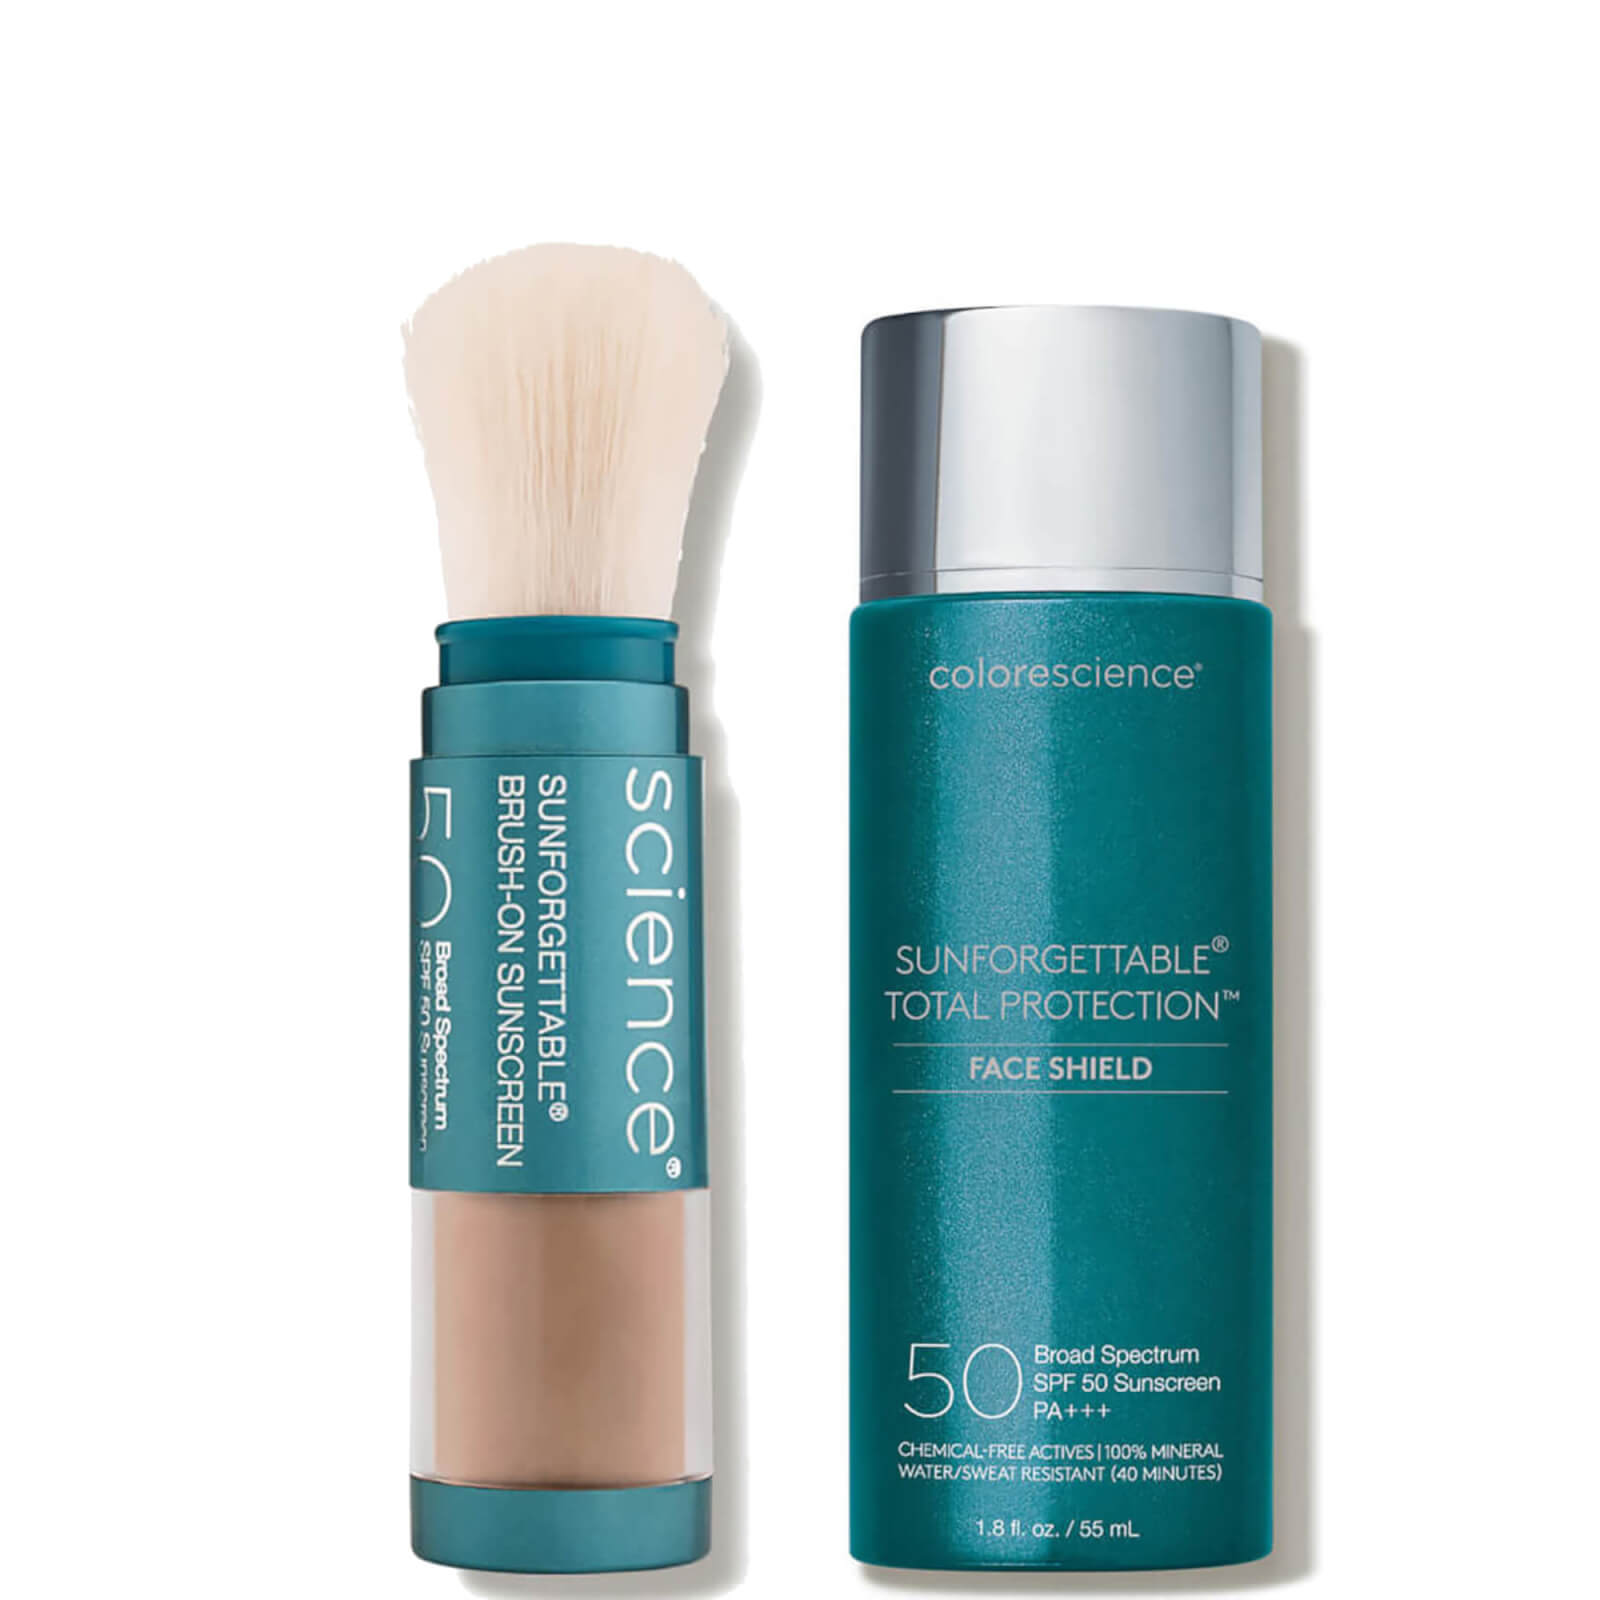 Colorescience Sunforgettable Face Shield And Brush-on Duo - Worth $111 (various Shades) In Deep